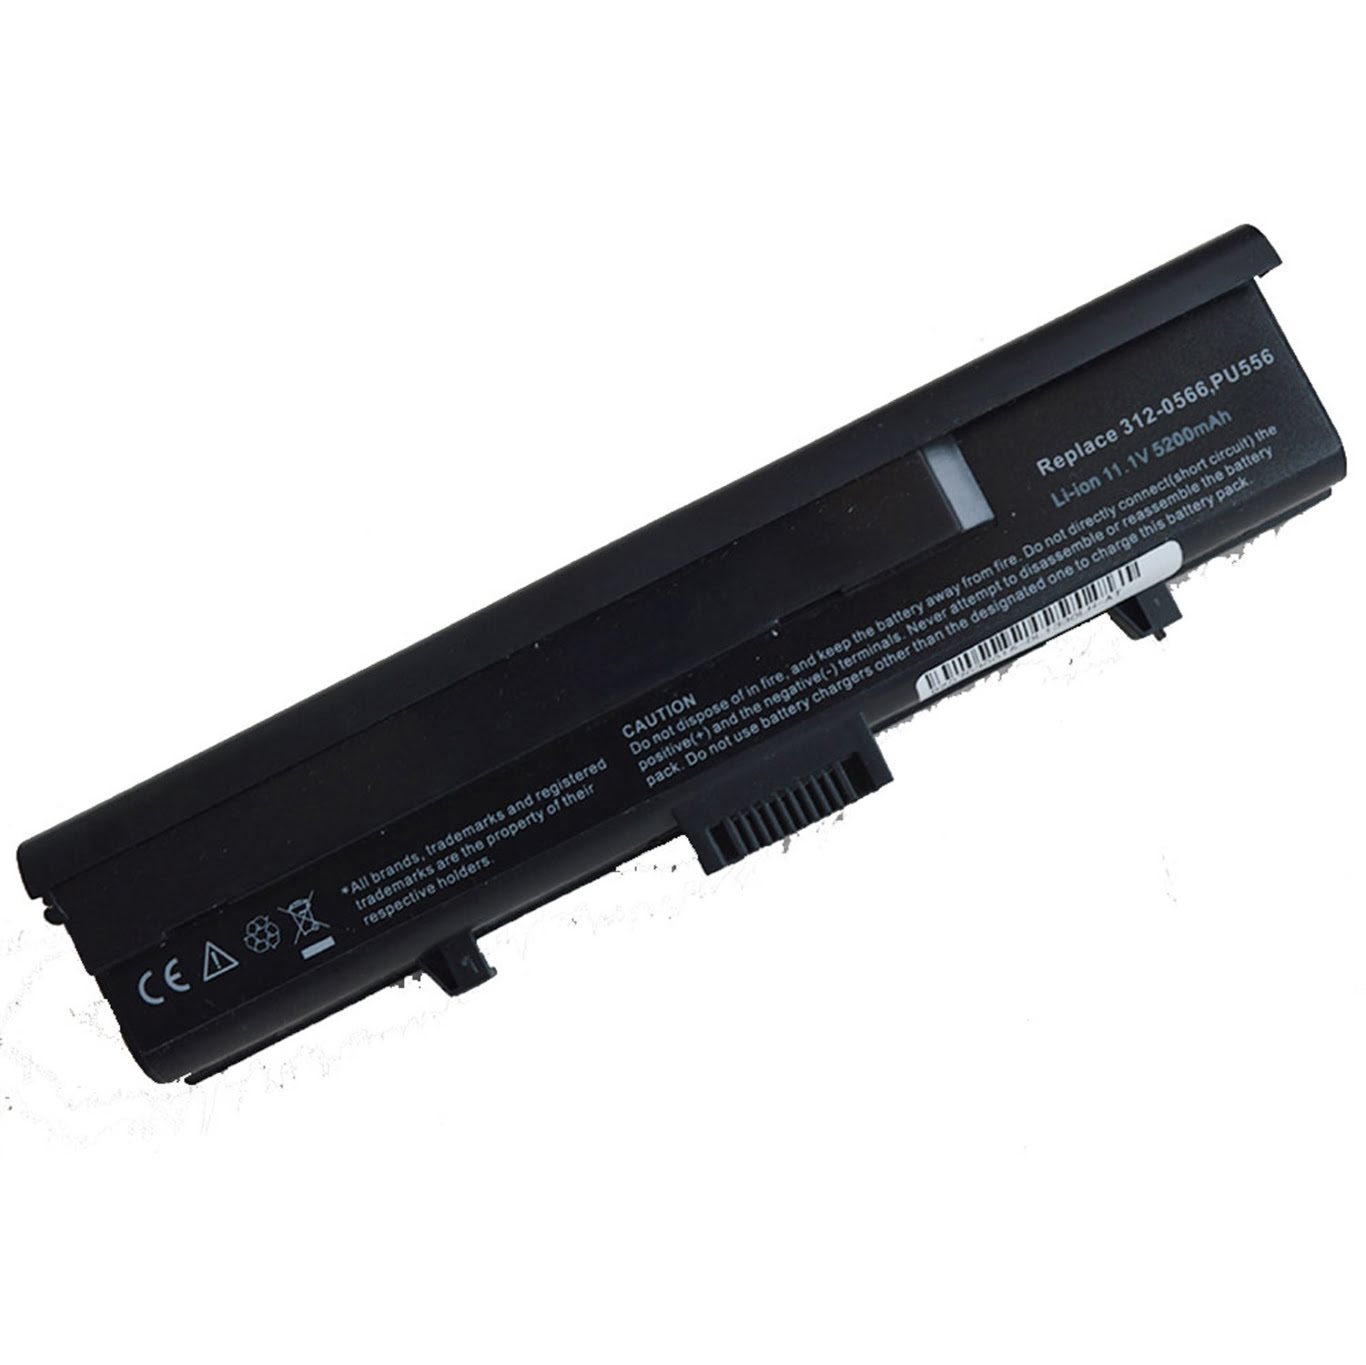 0CR036, 0DU128 replacement Laptop Battery for Dell Inspiron 1318, XPS M1330, 11.1V, 6 cells, 4400mAh